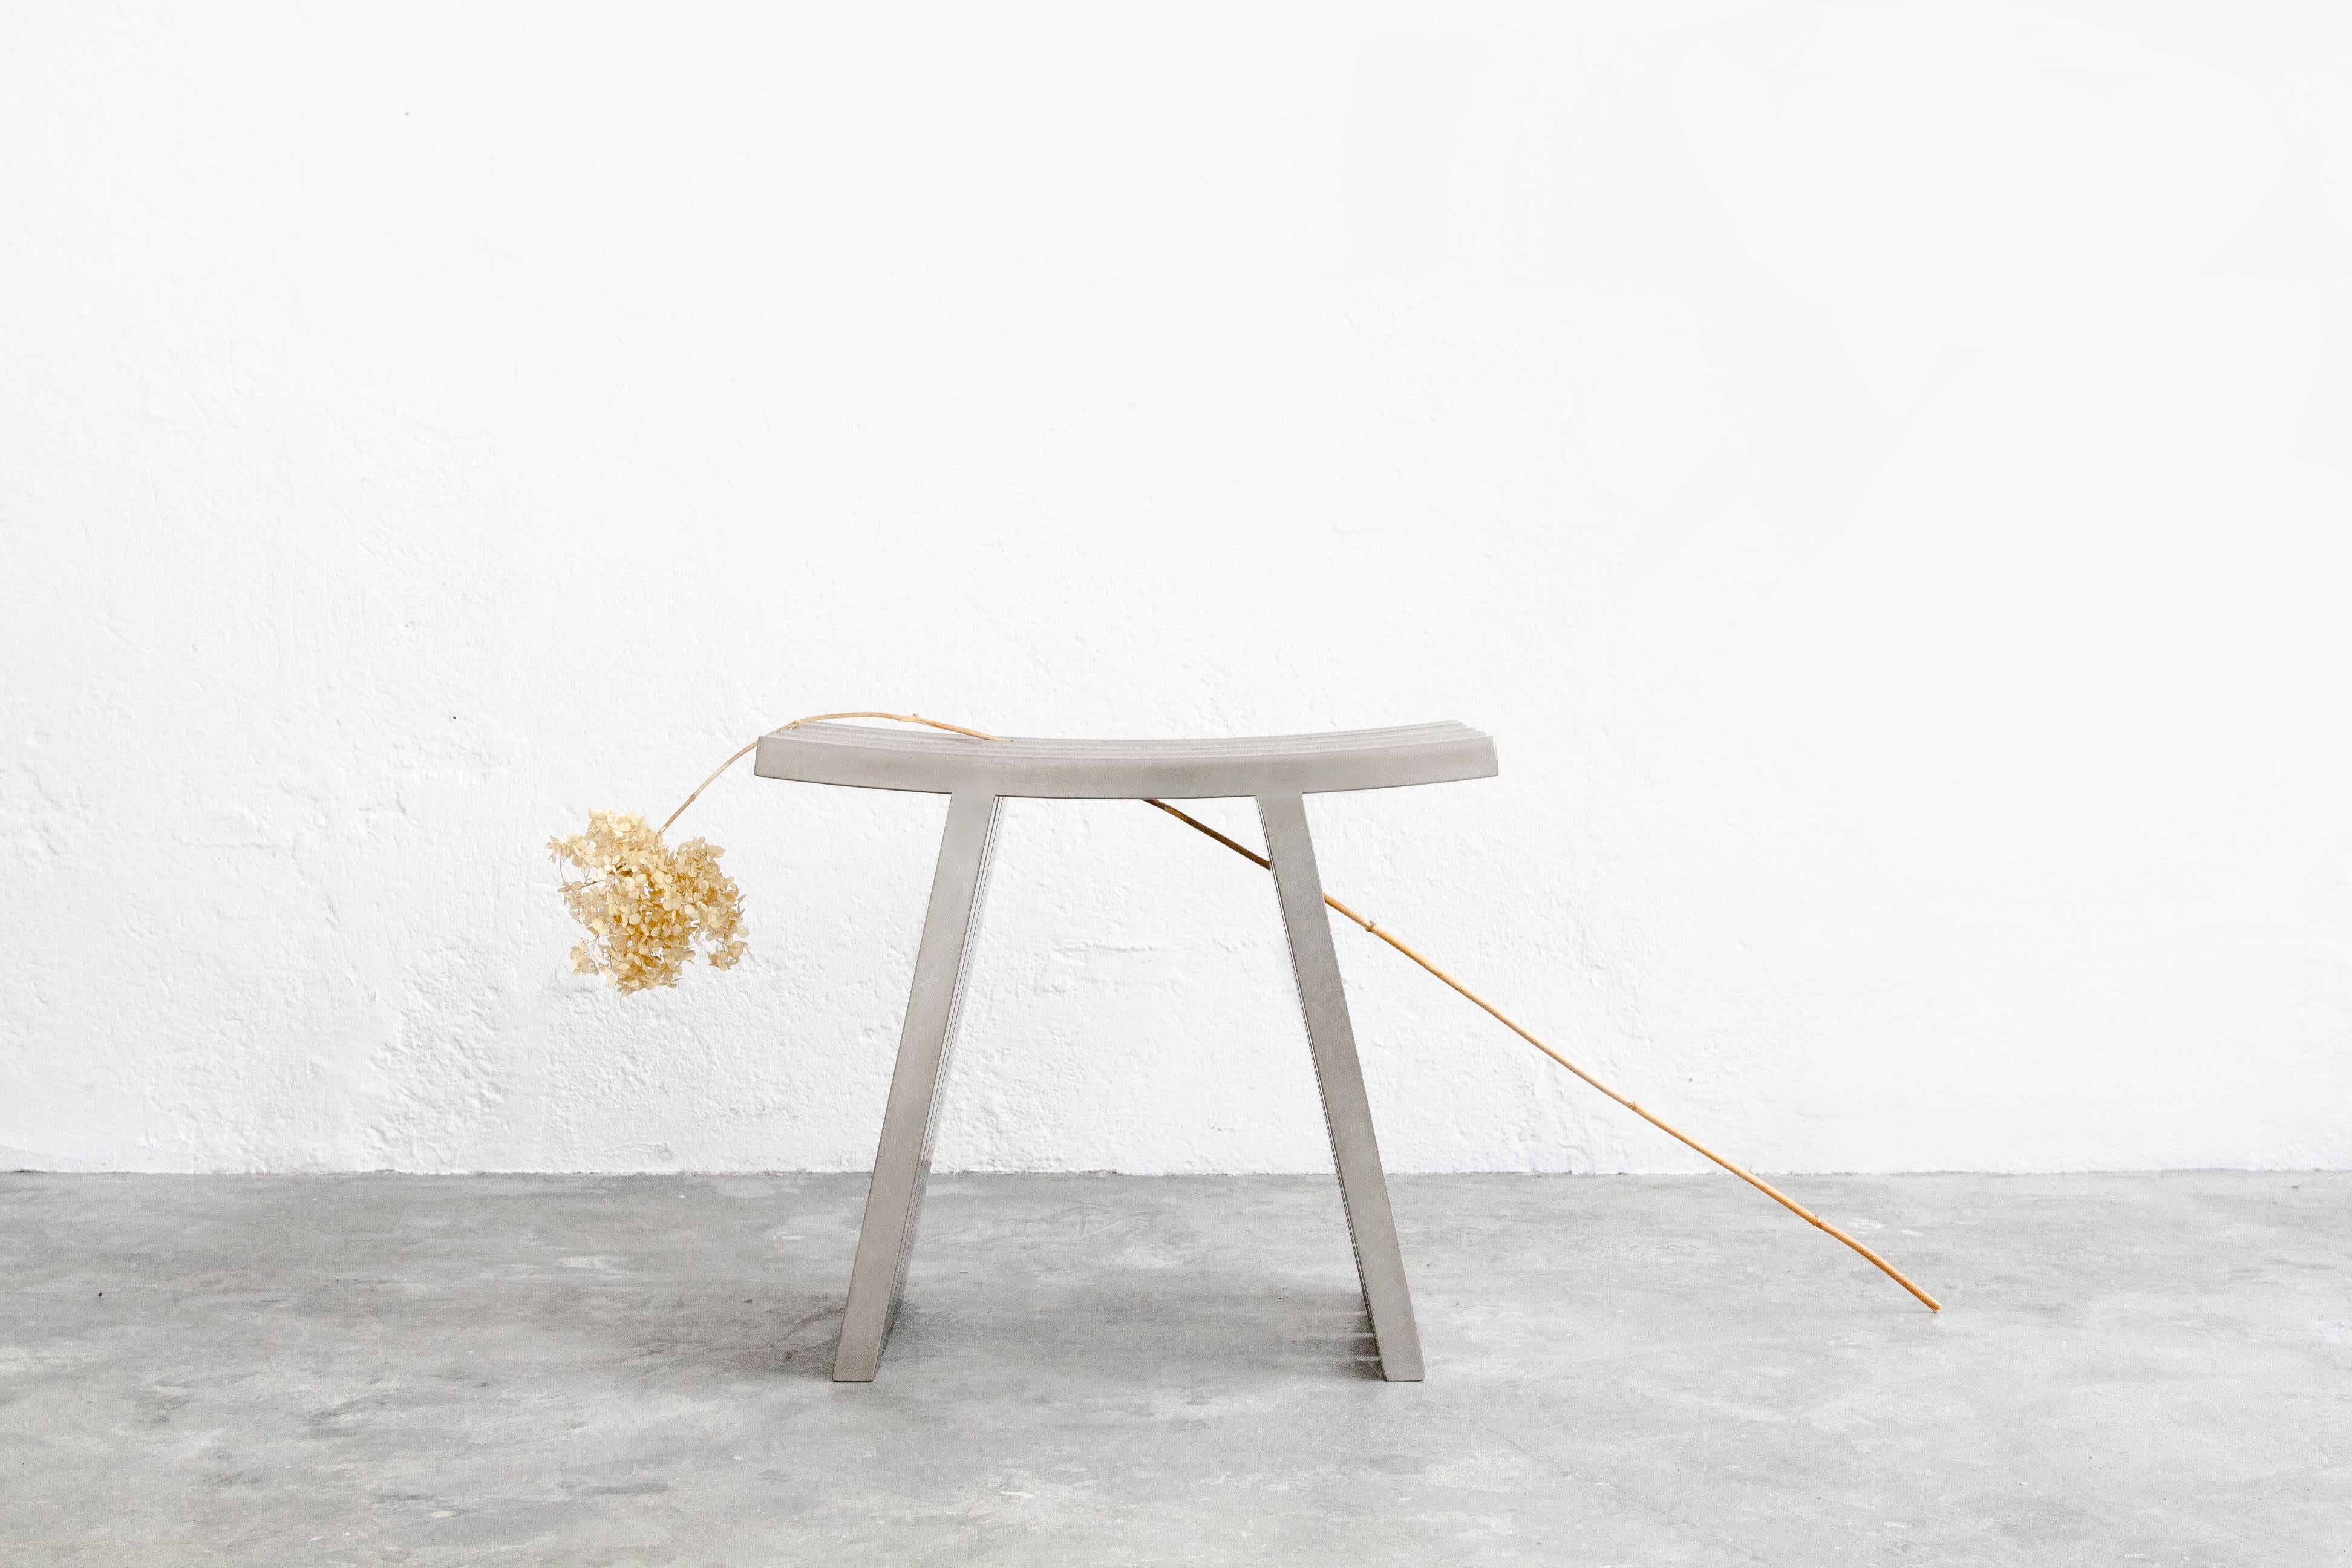 LINIYA Stool is Presented by Galerija VARTAI

Liniya stool by Katryna Sadauskaite is a limited edition design piece in which graceful bent lines from nature are transferred to suit modern lifestyle. Design object combines two feelings: soft and